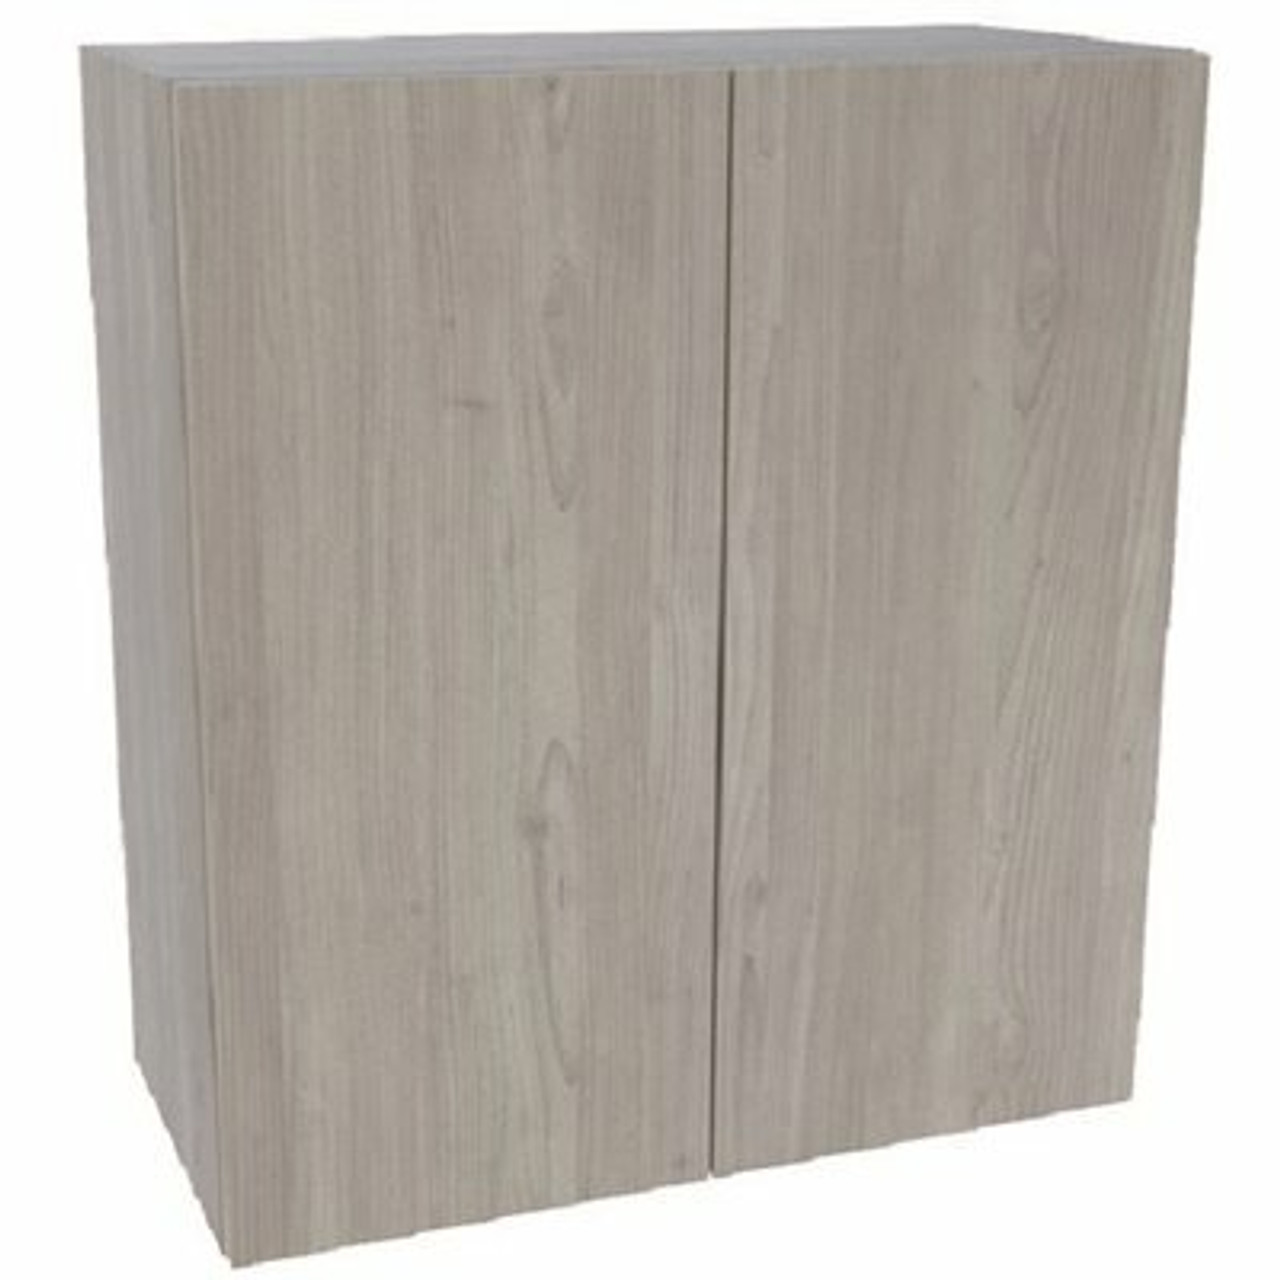 Cambridge Ready To Assemble Threespine 27 In. X 36 In. X 12 In. Stock Wall Cabinet In Grey Nordic